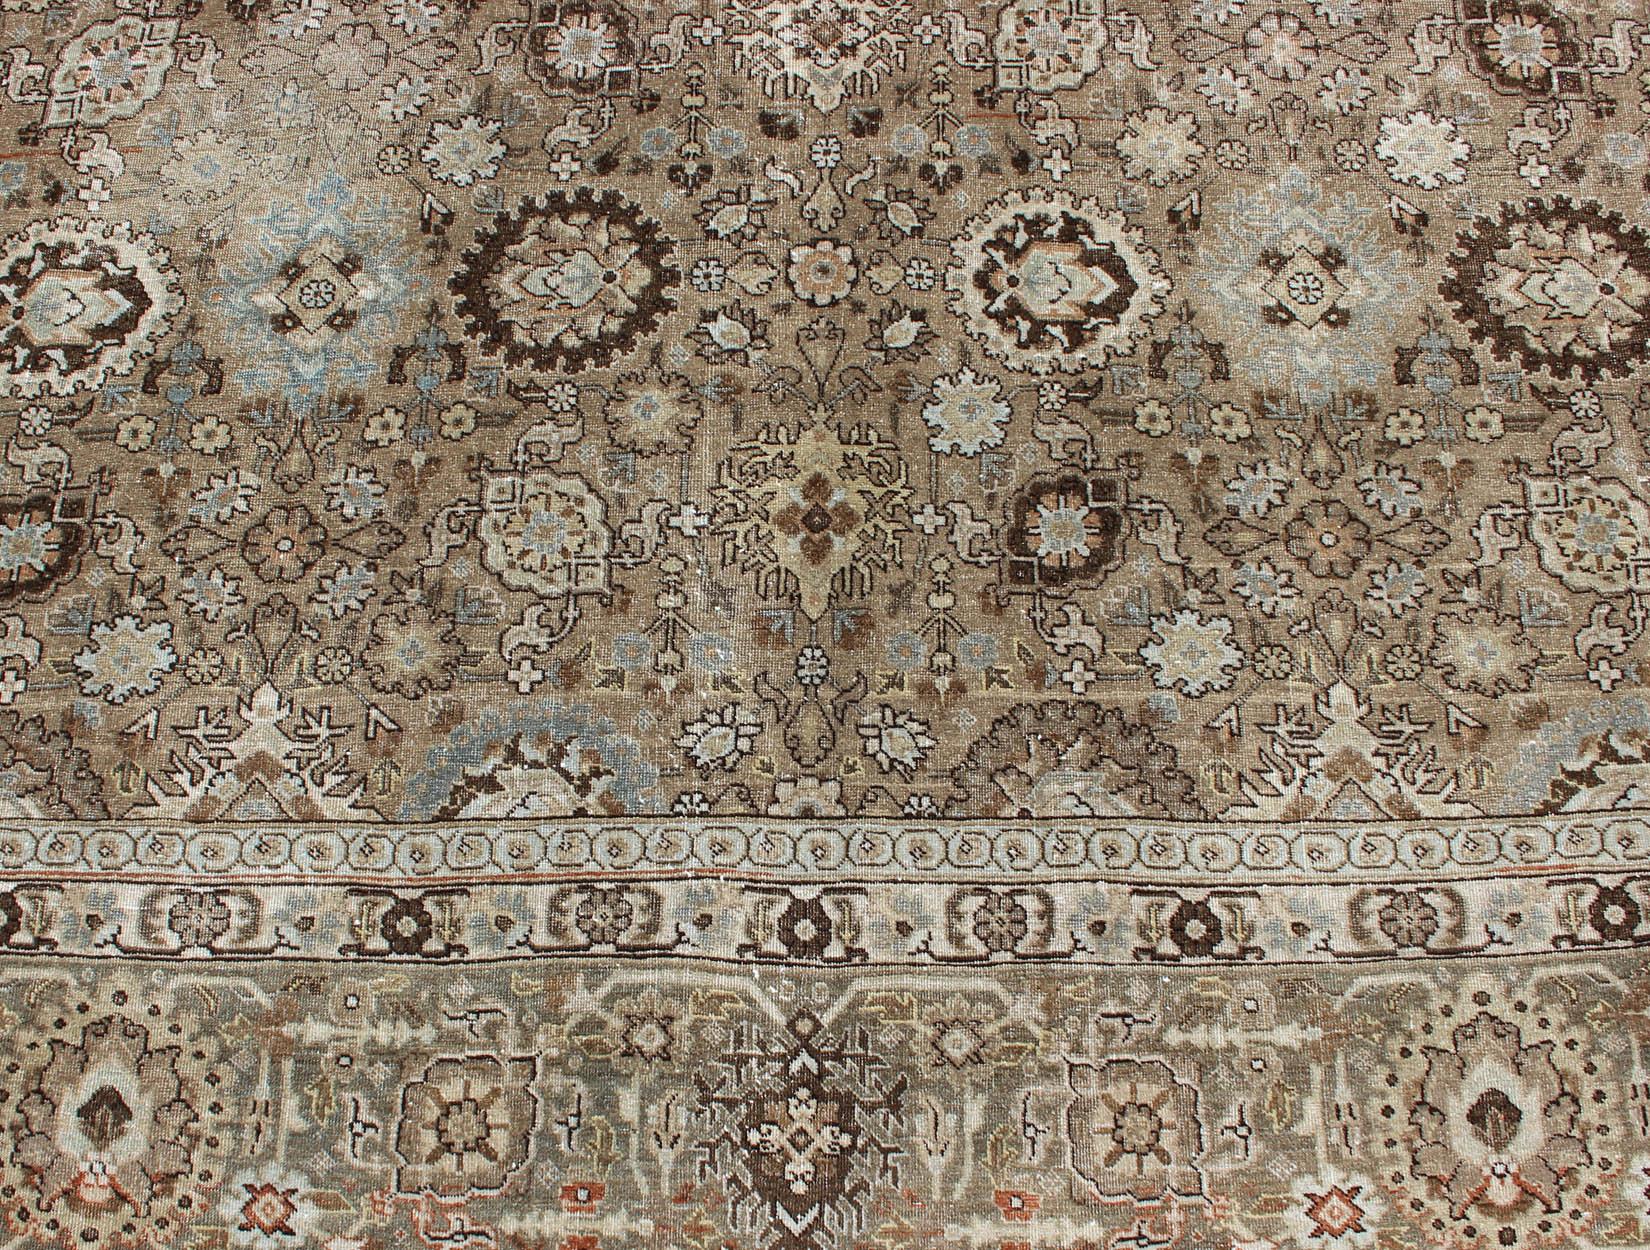 Wool Antique Persian Tabriz Rug in Mocha, Camel, Brown, Gray and Light Blue For Sale